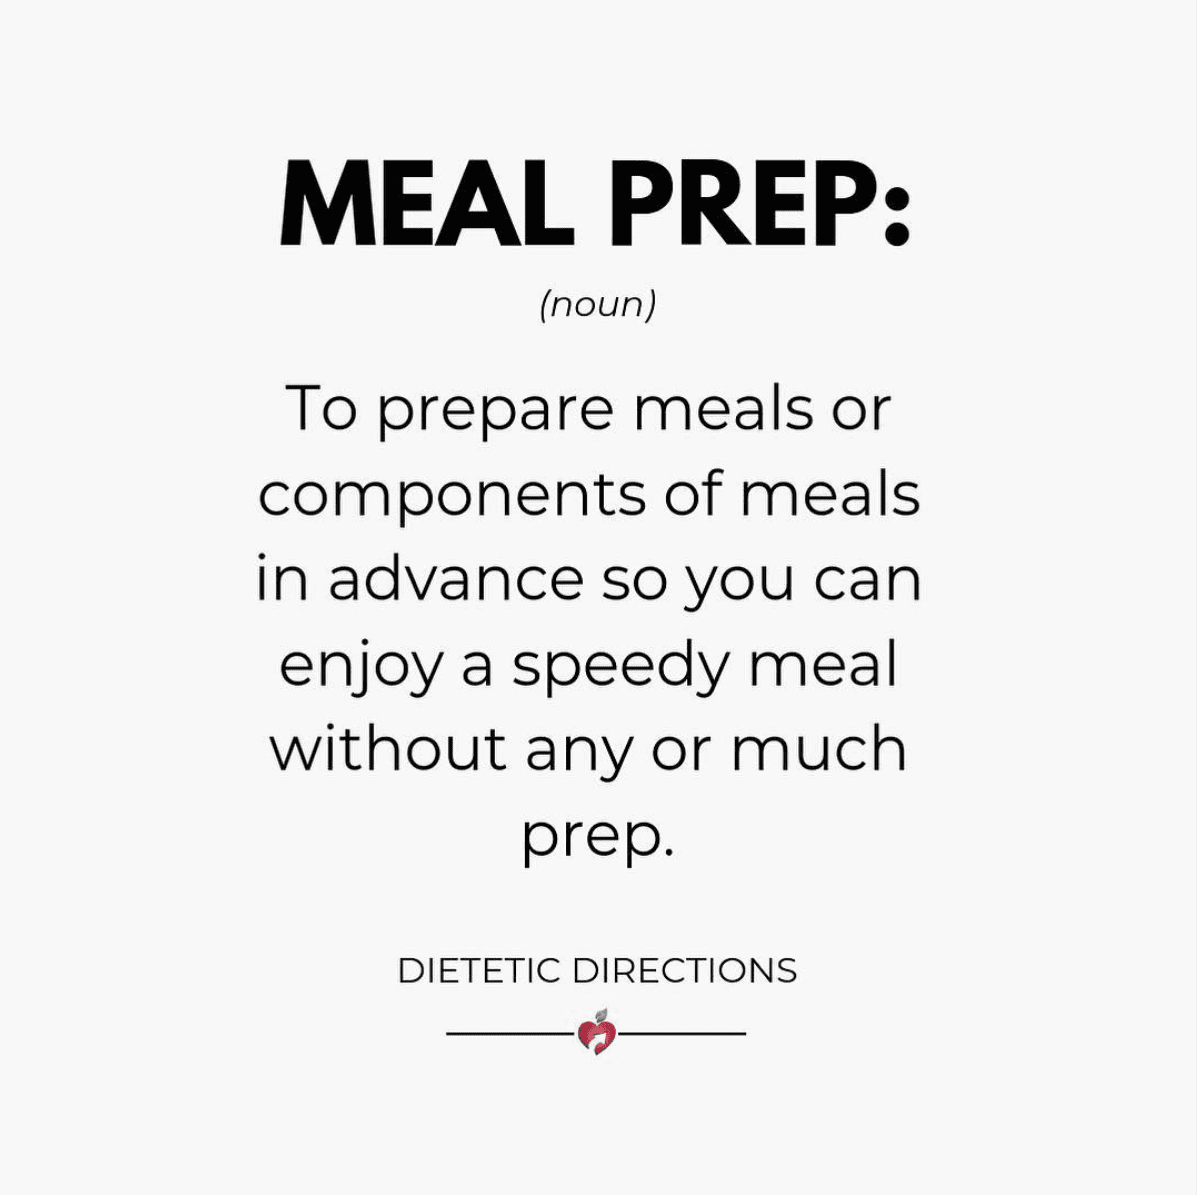 Meal plan prep planning grocery groceries planner healthy nutritious easy tasty delicious yummy meals tips ideas setting goal goals tips quote meal prep